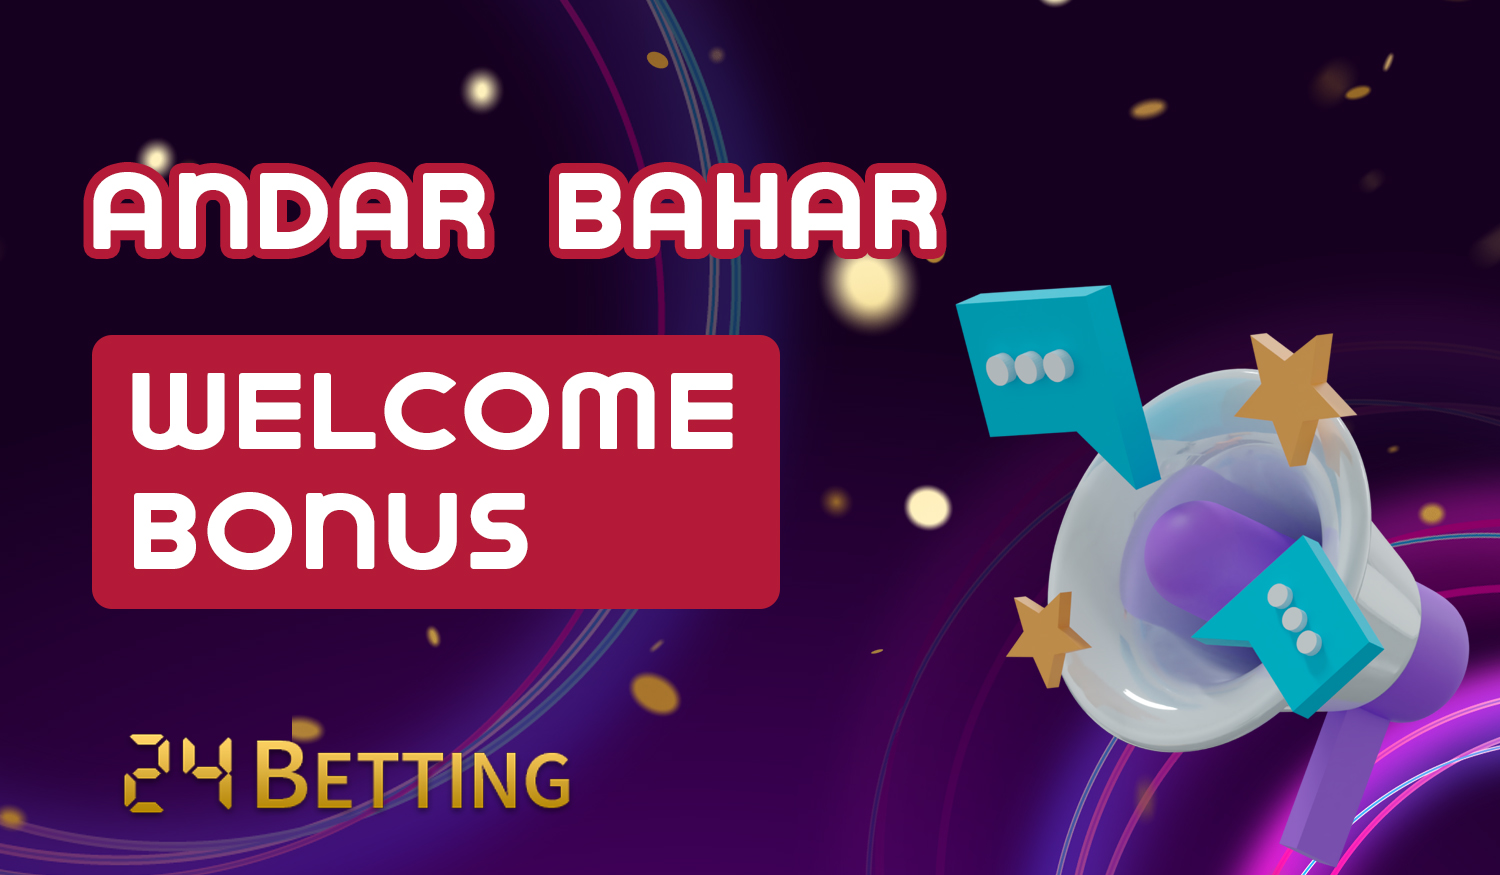 Features of 24betting welcome bonus for users from India